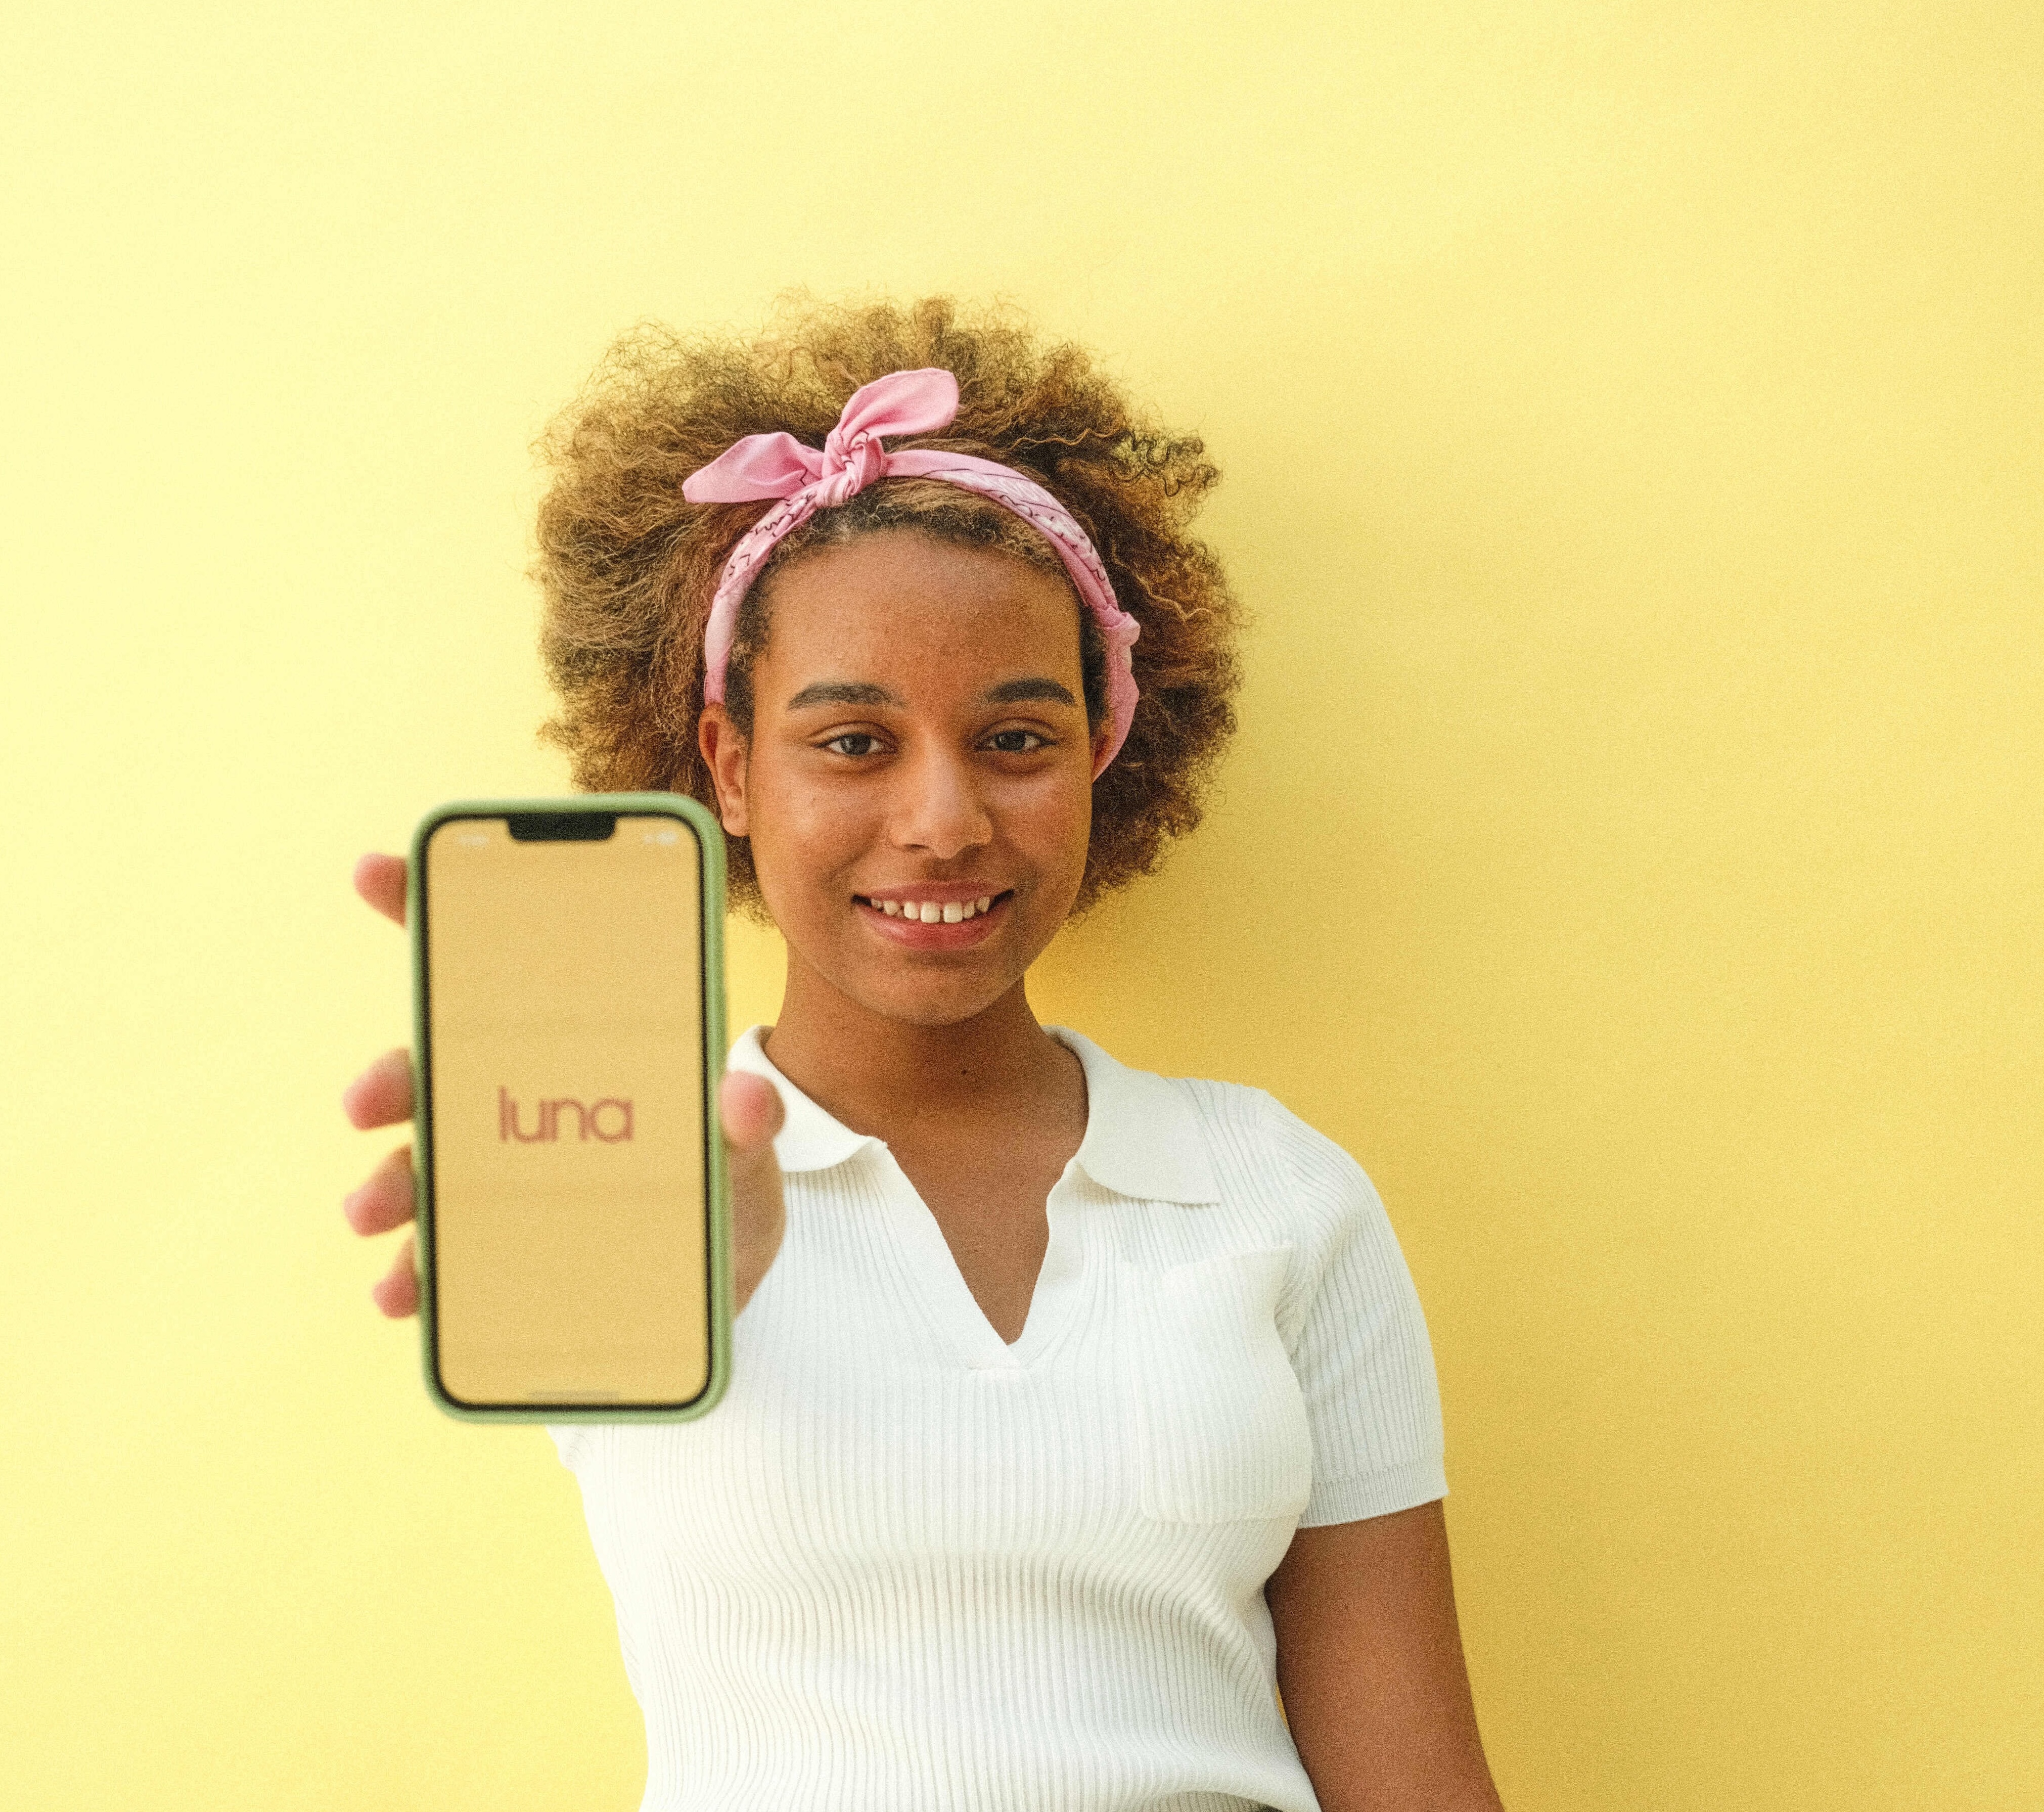 a girl holding a phone up with the luna logo on it